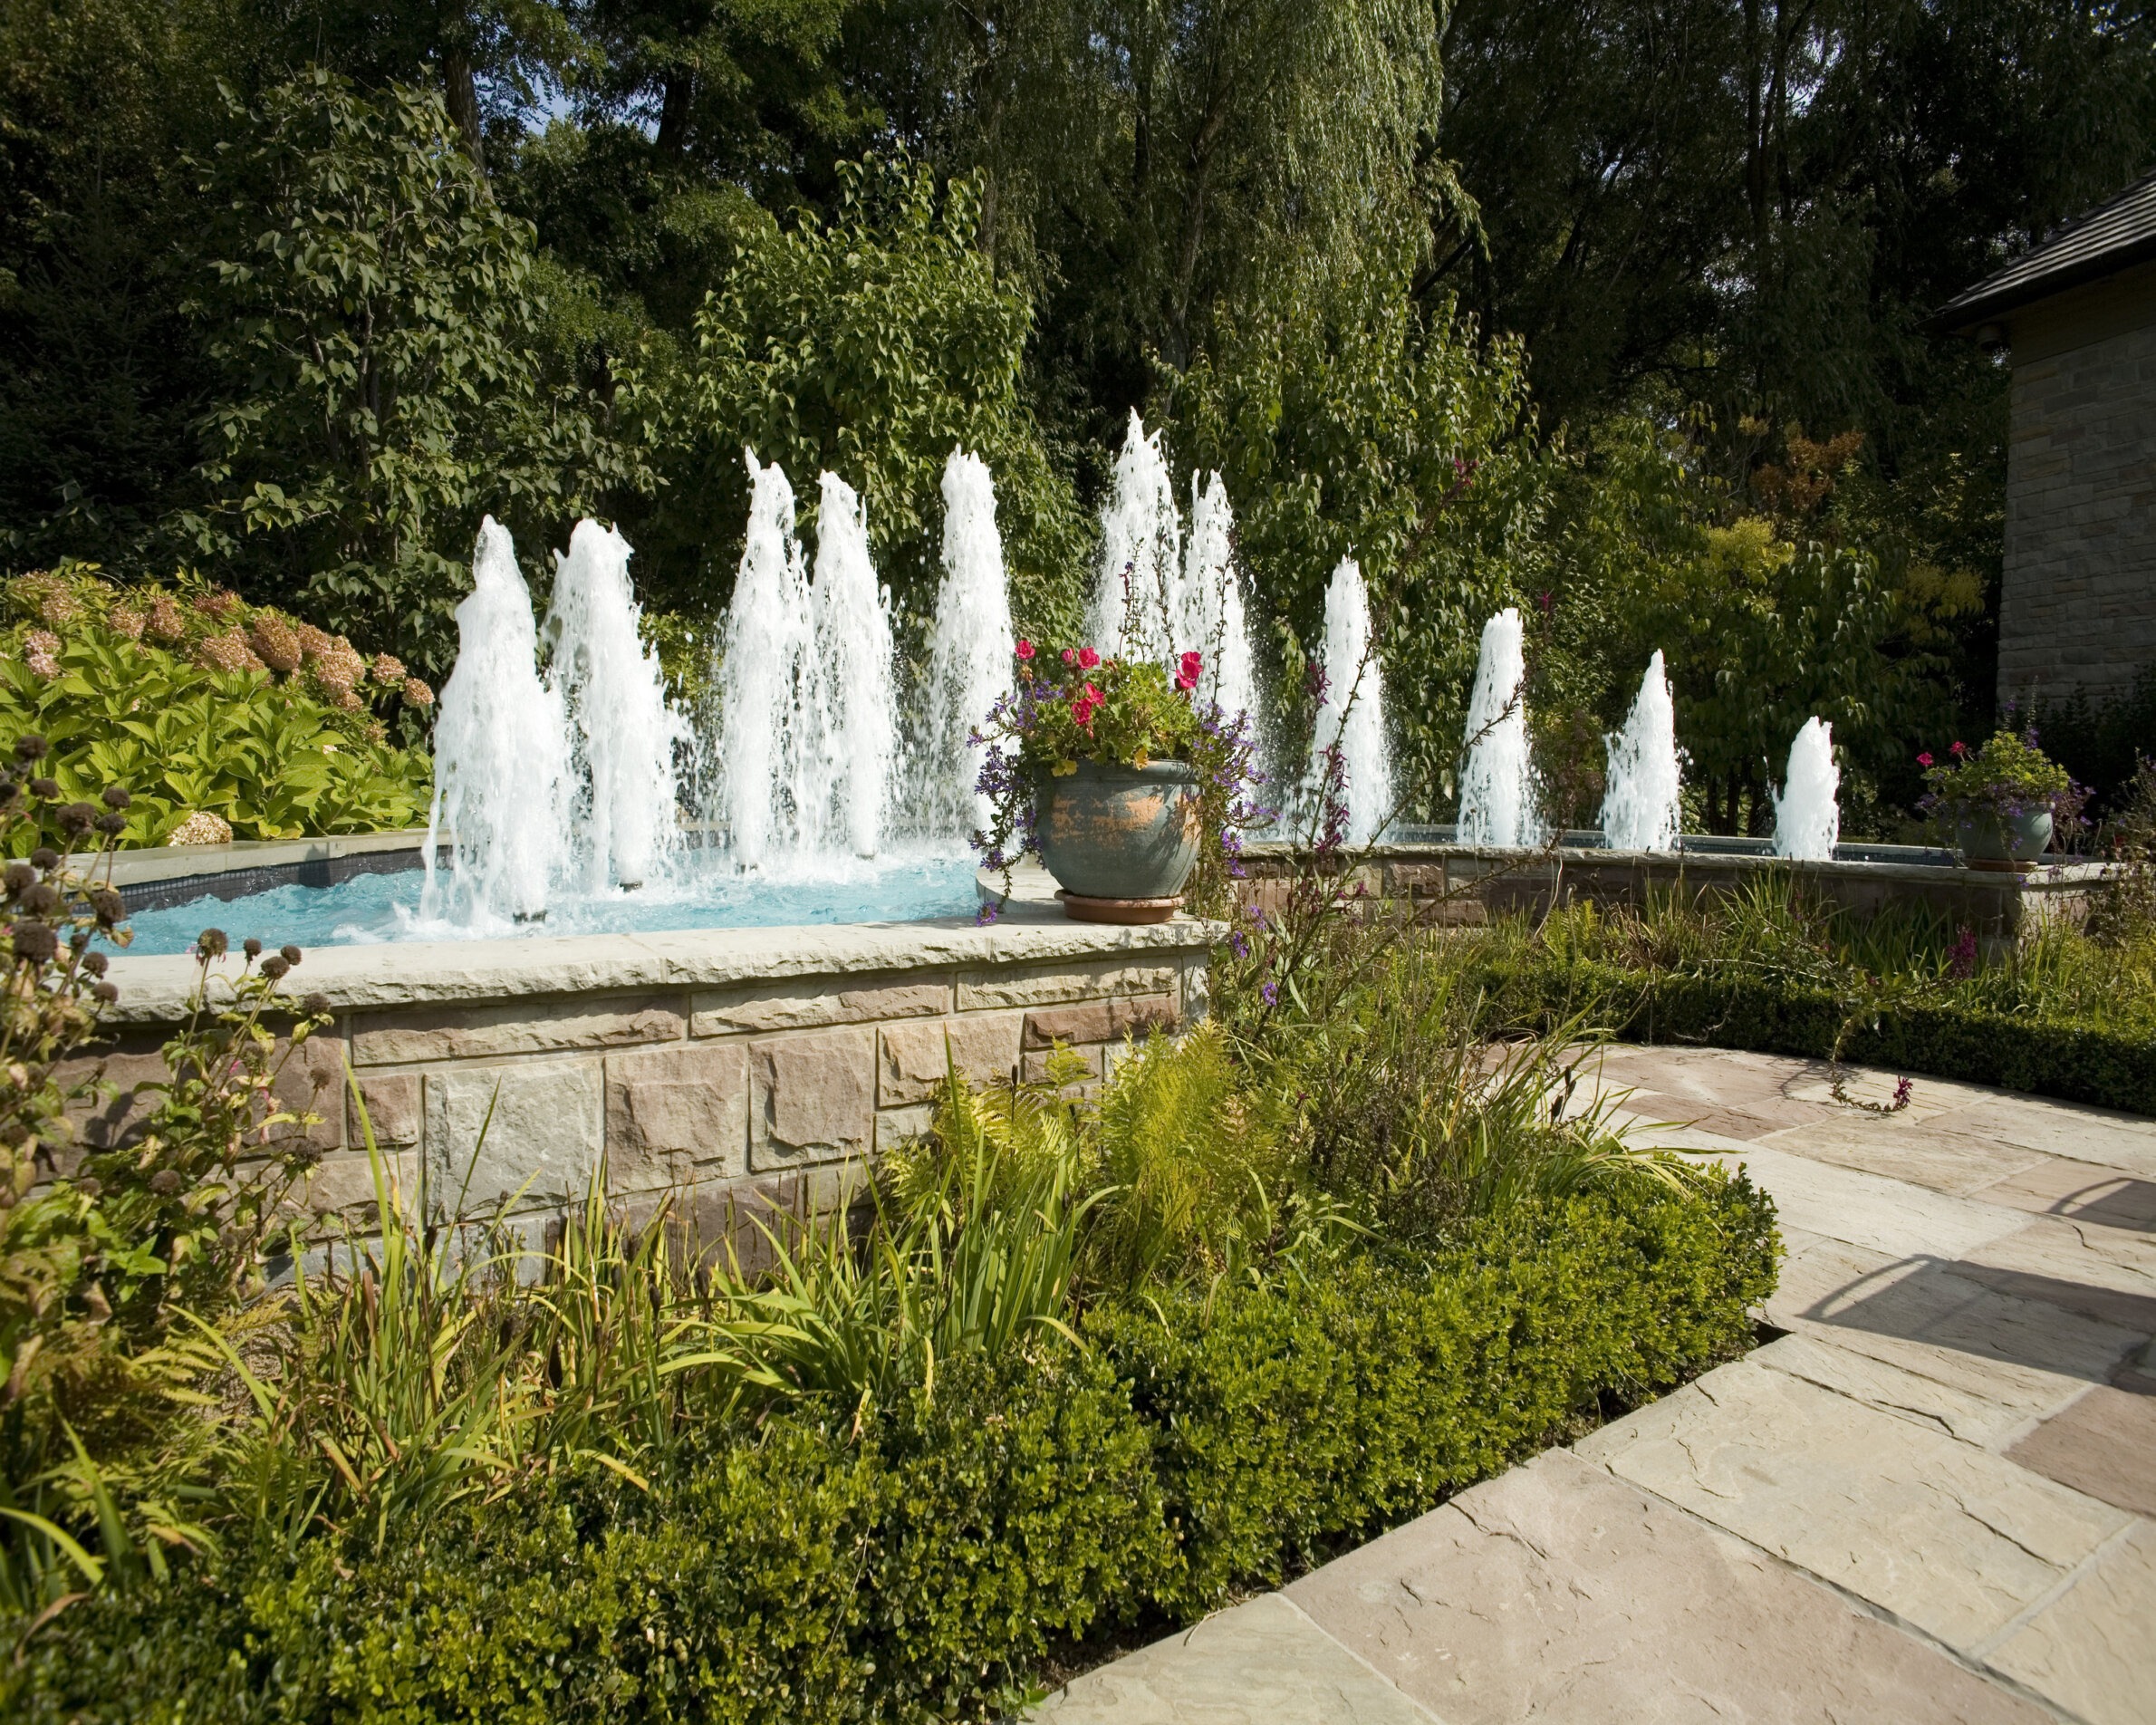 A serene garden featuring a series of water jets creating a linear fountain against lush greenery, bounded by a stone patio with flowering plants.